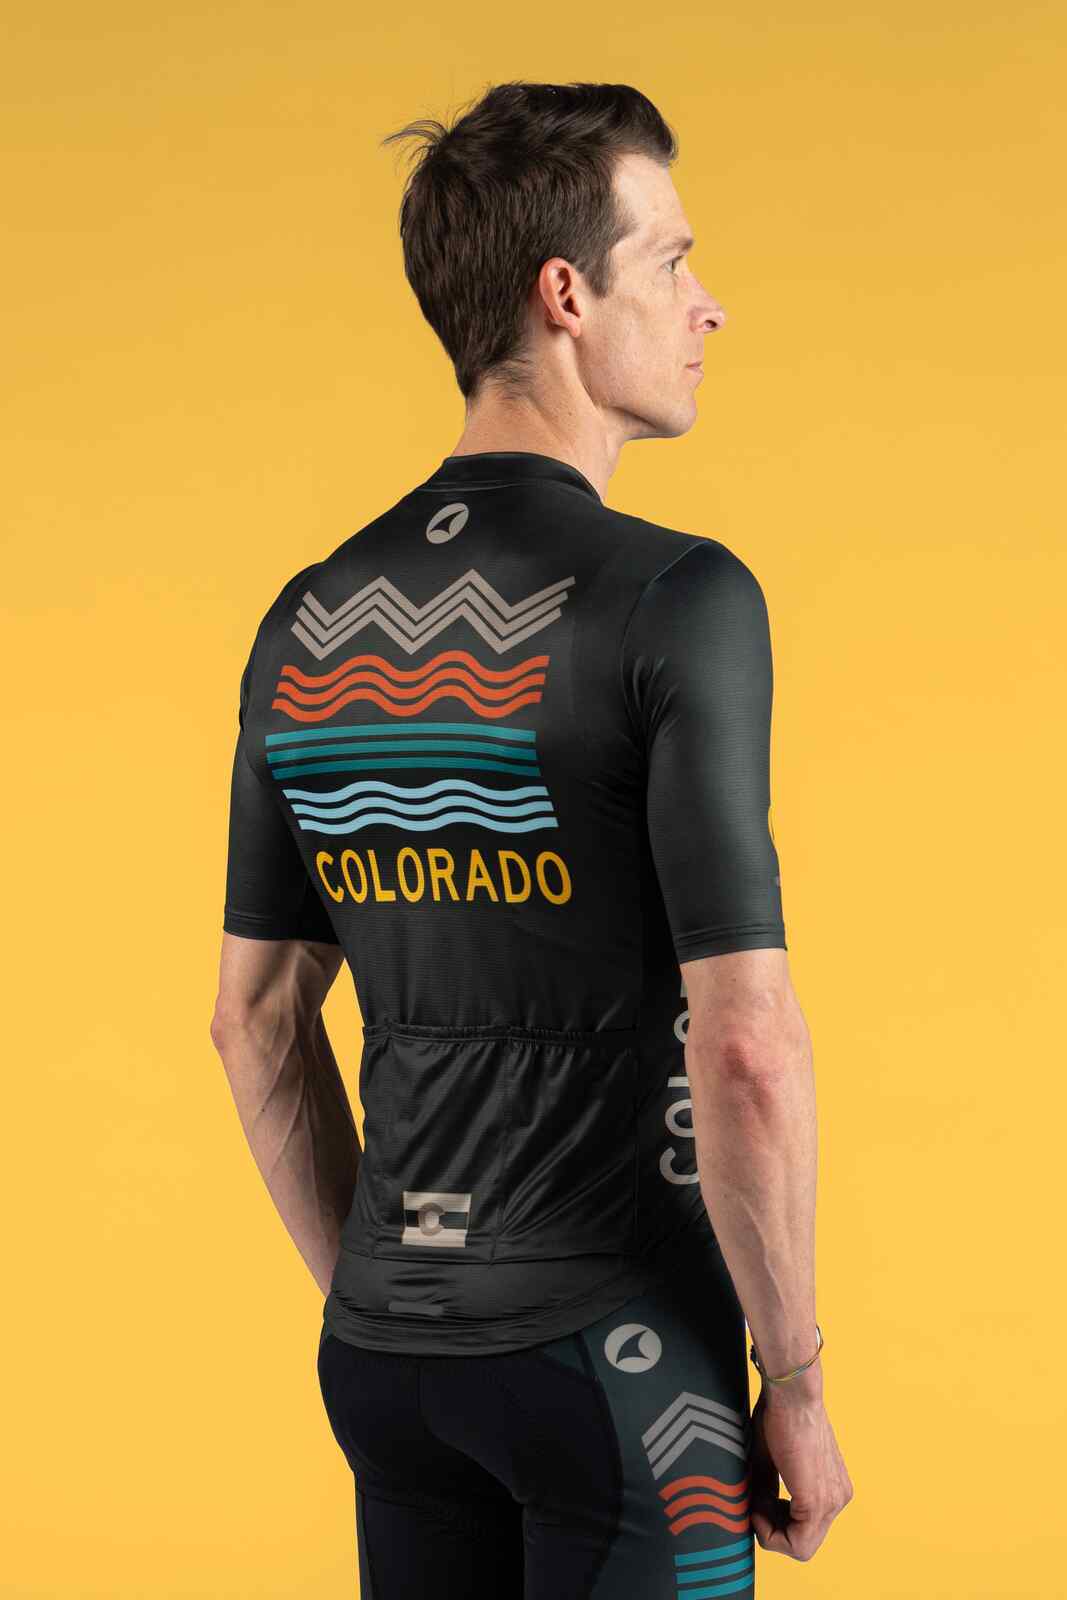 Men's Navy Blue Colorado Cycling Jersey - Back View